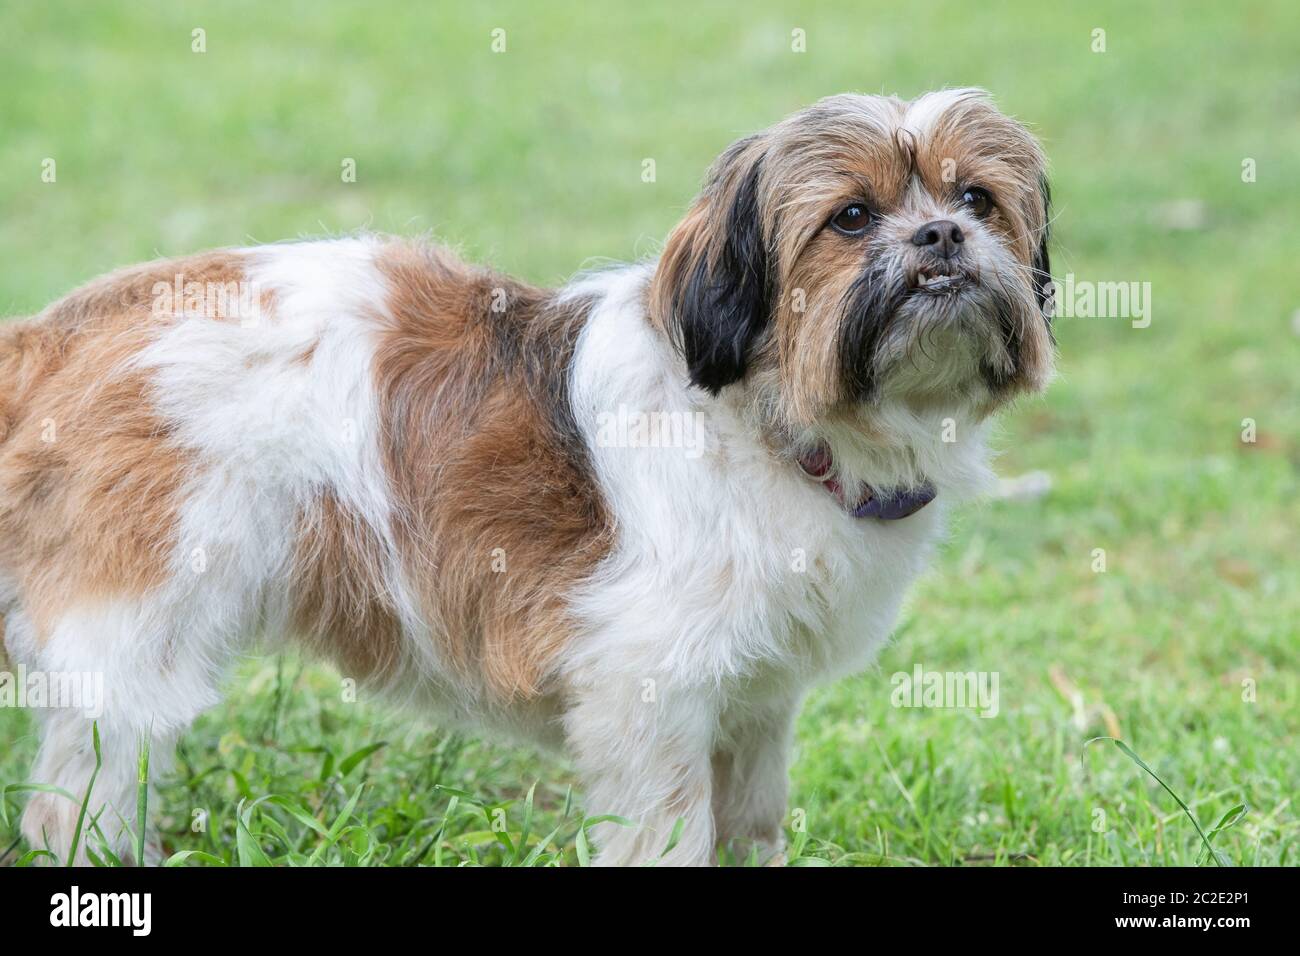 Shih cross stock and images - Alamy